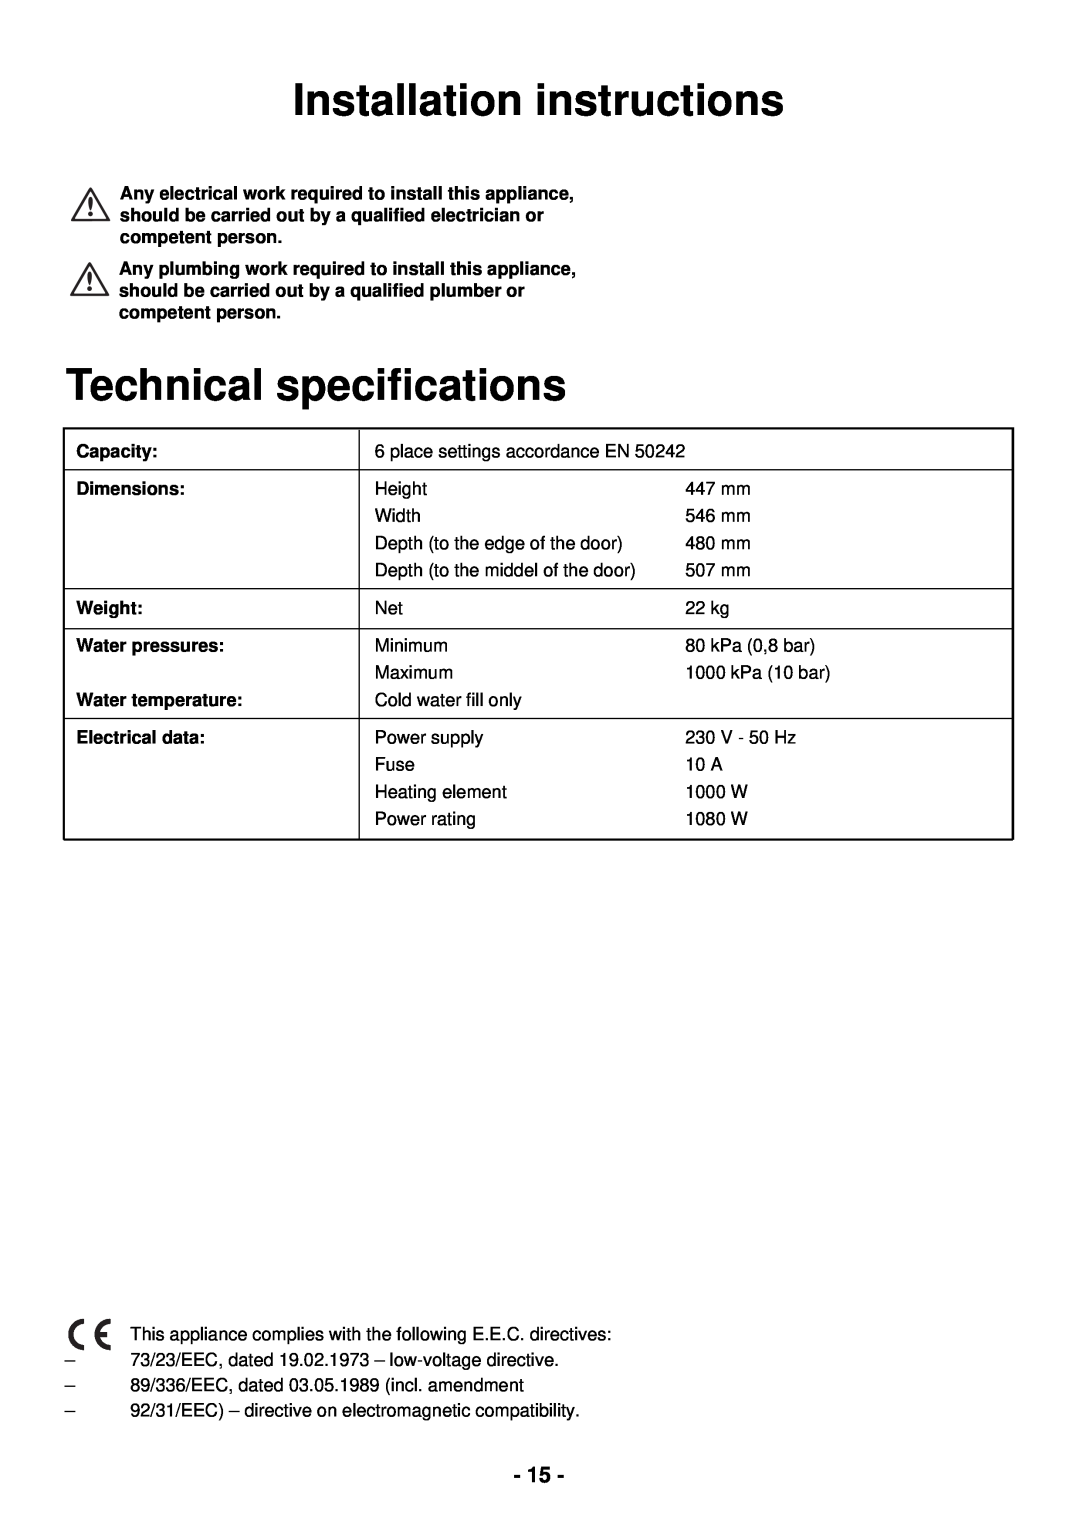 Zanussi ZSF 2420 manual Installation instructions, Technical speciﬁcations 